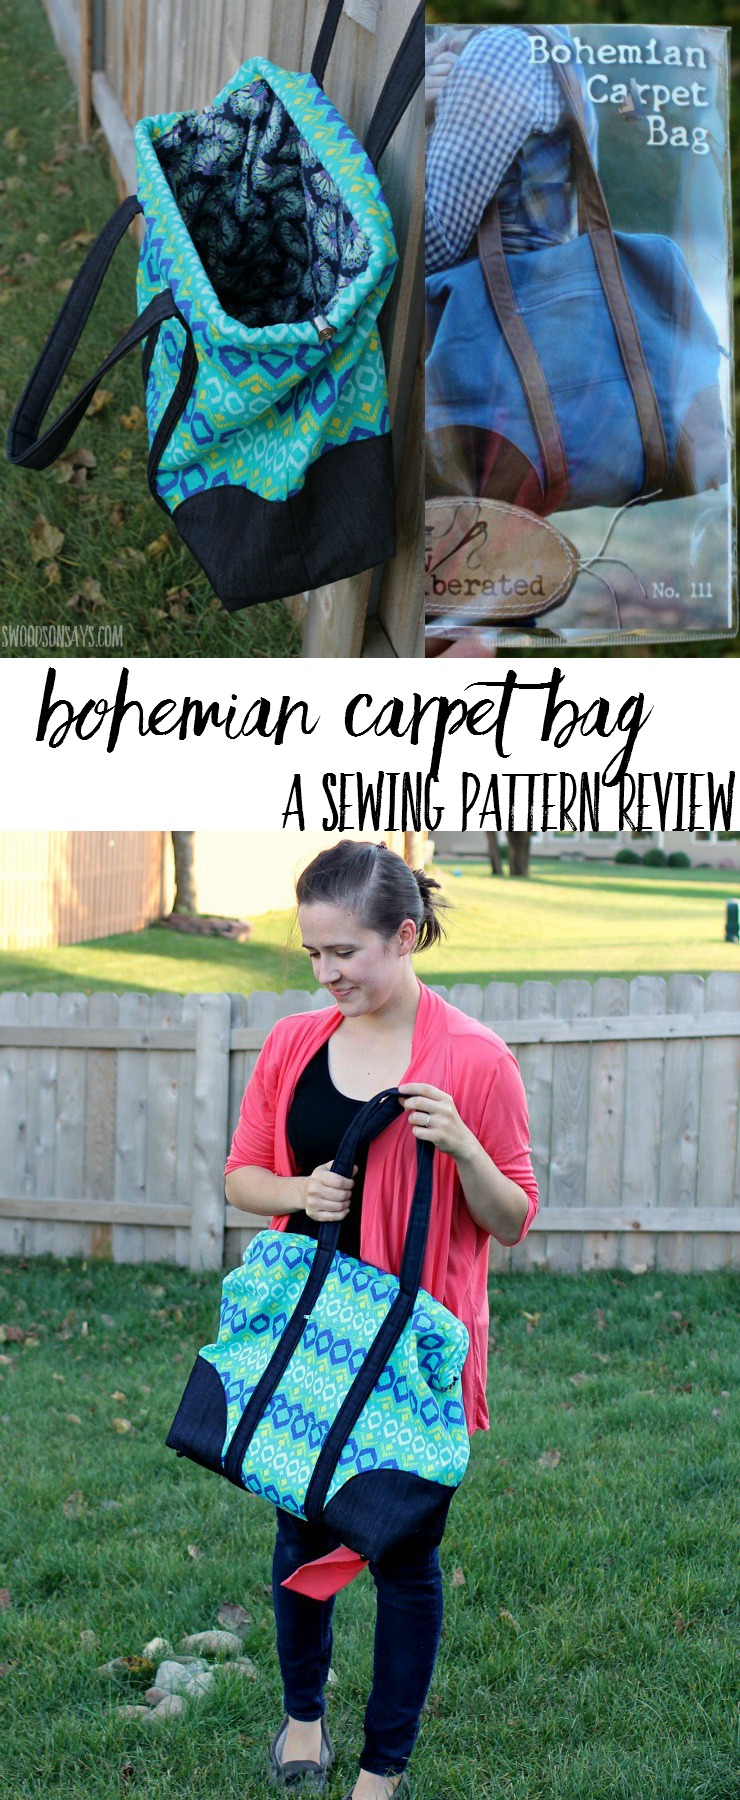 This is the biggest purse pattern ever! Check out the review for the Sew Liberated Bohemian Carpet Bag - a sewing pattern for a "mary poppins style" purse that is perfect for road trips.